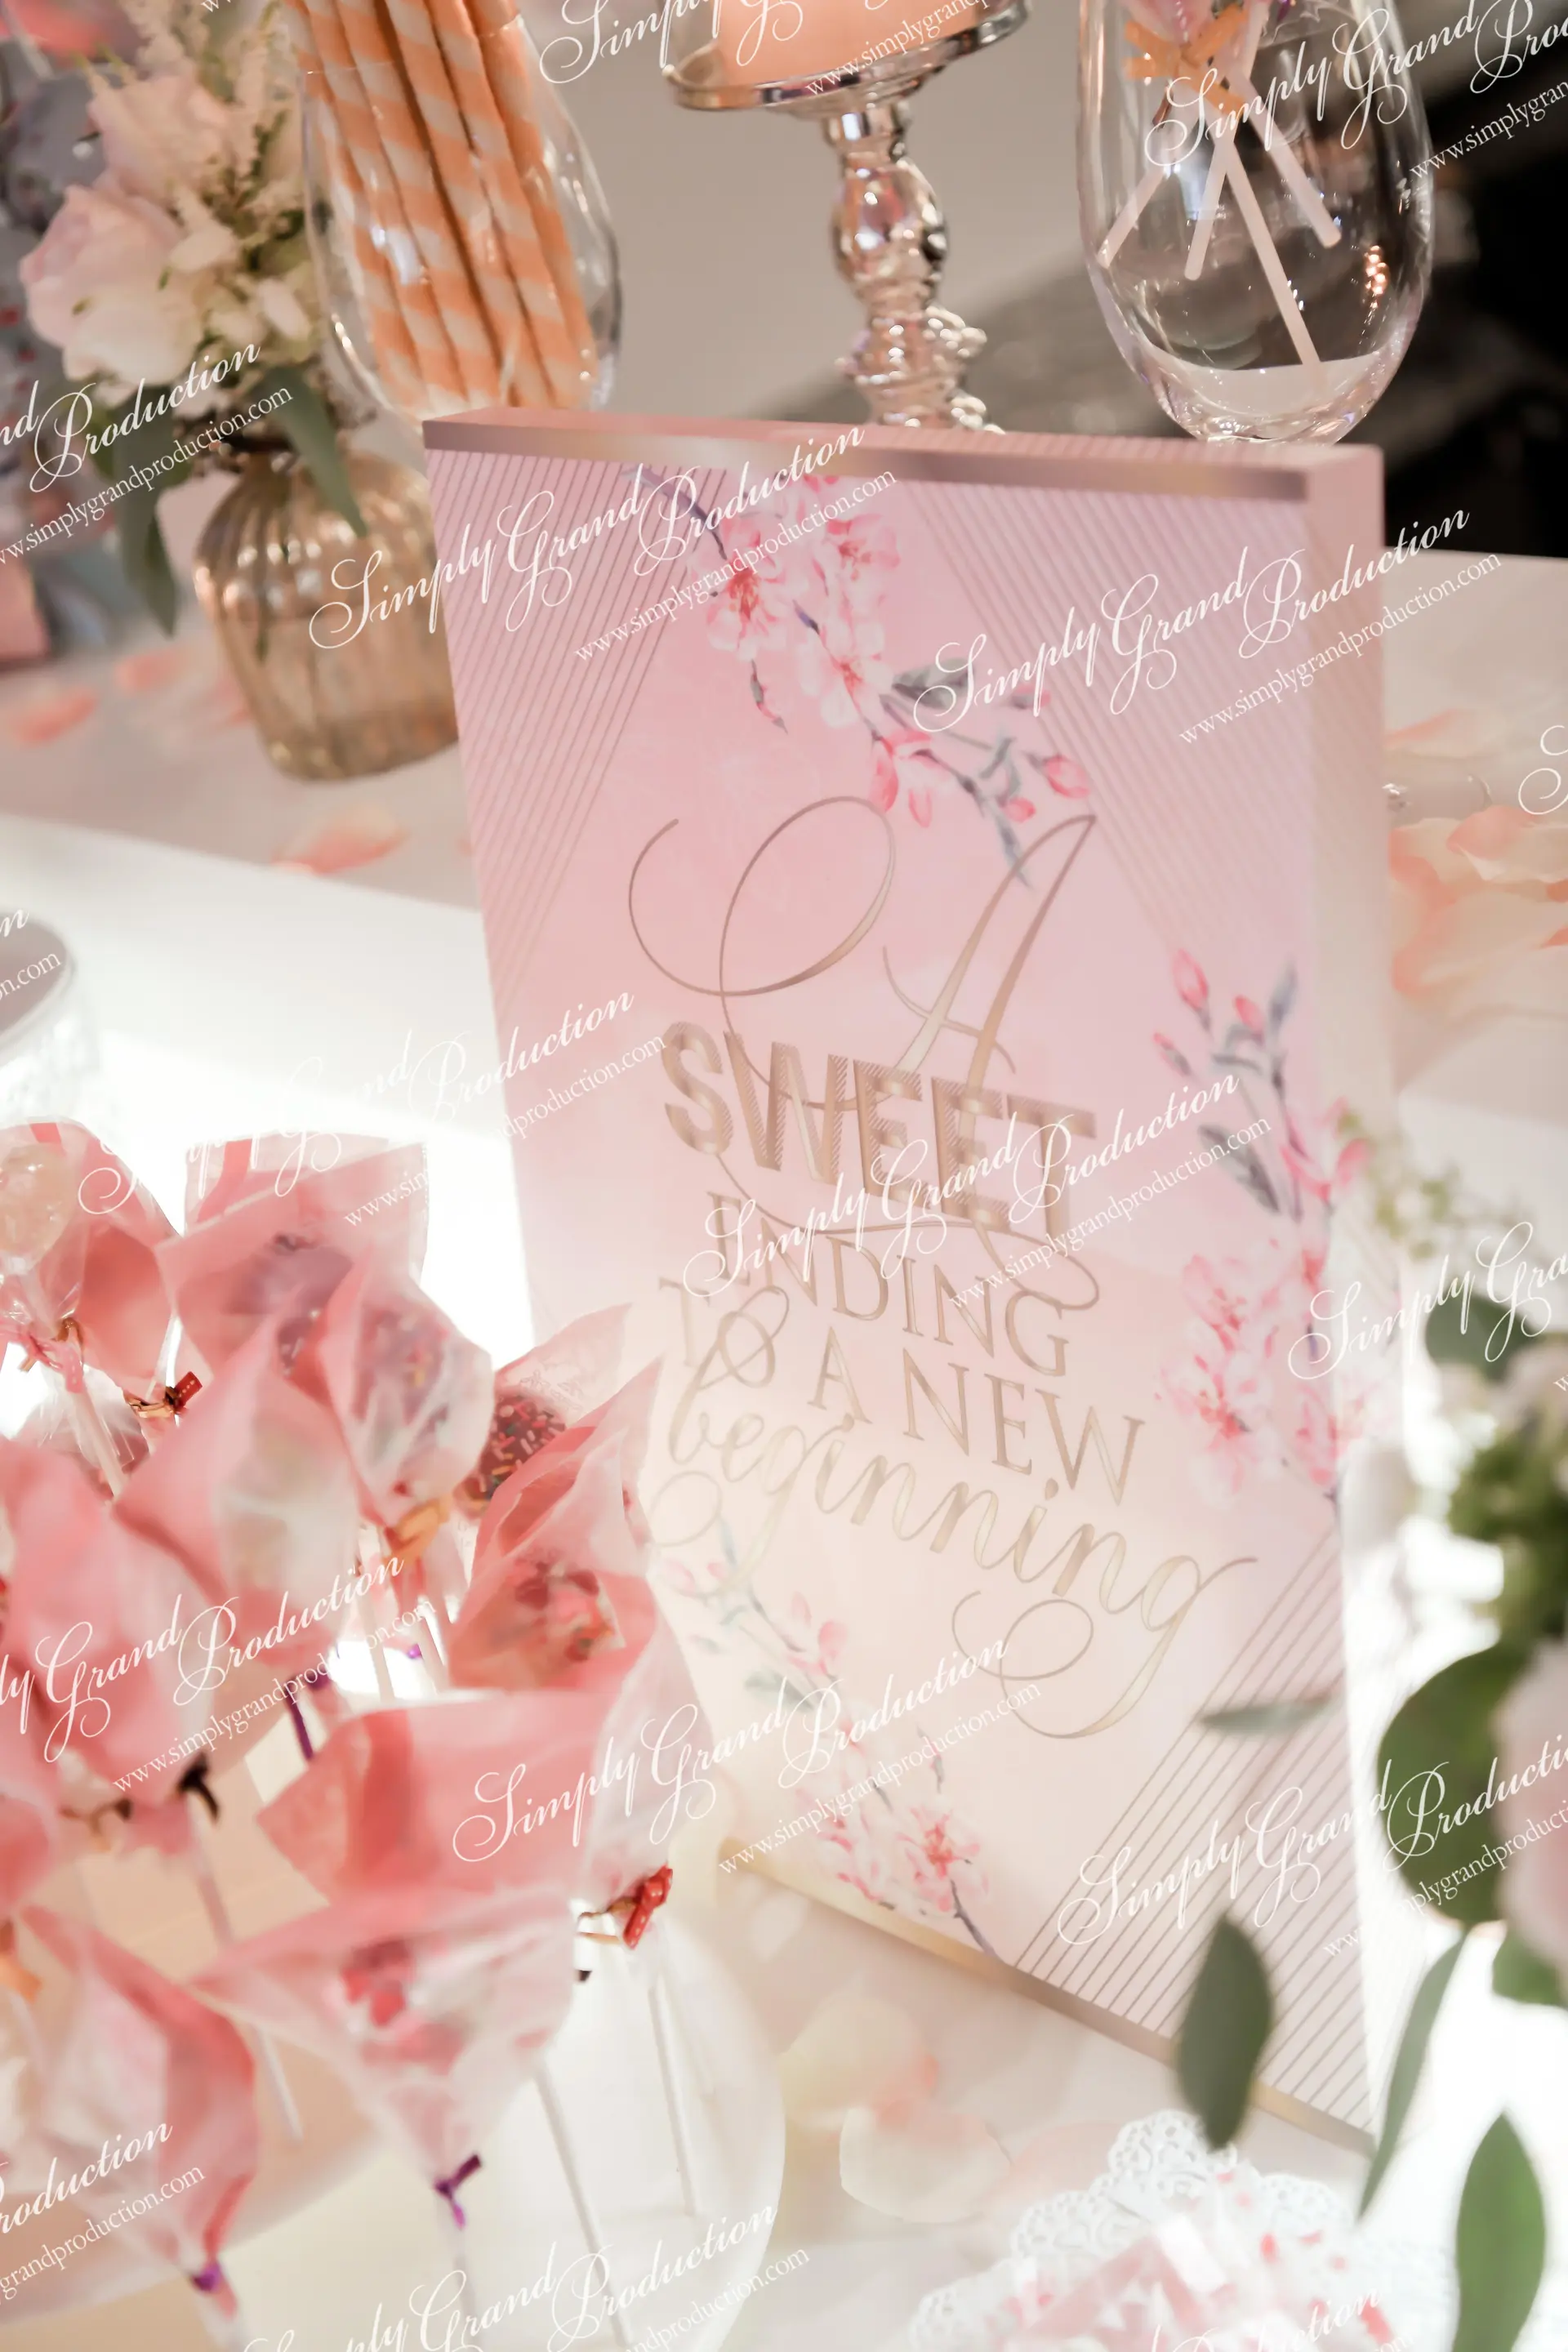 Simply_Grand_Production_wedding_deco_dessert_table_quote_InterContinental_1_13